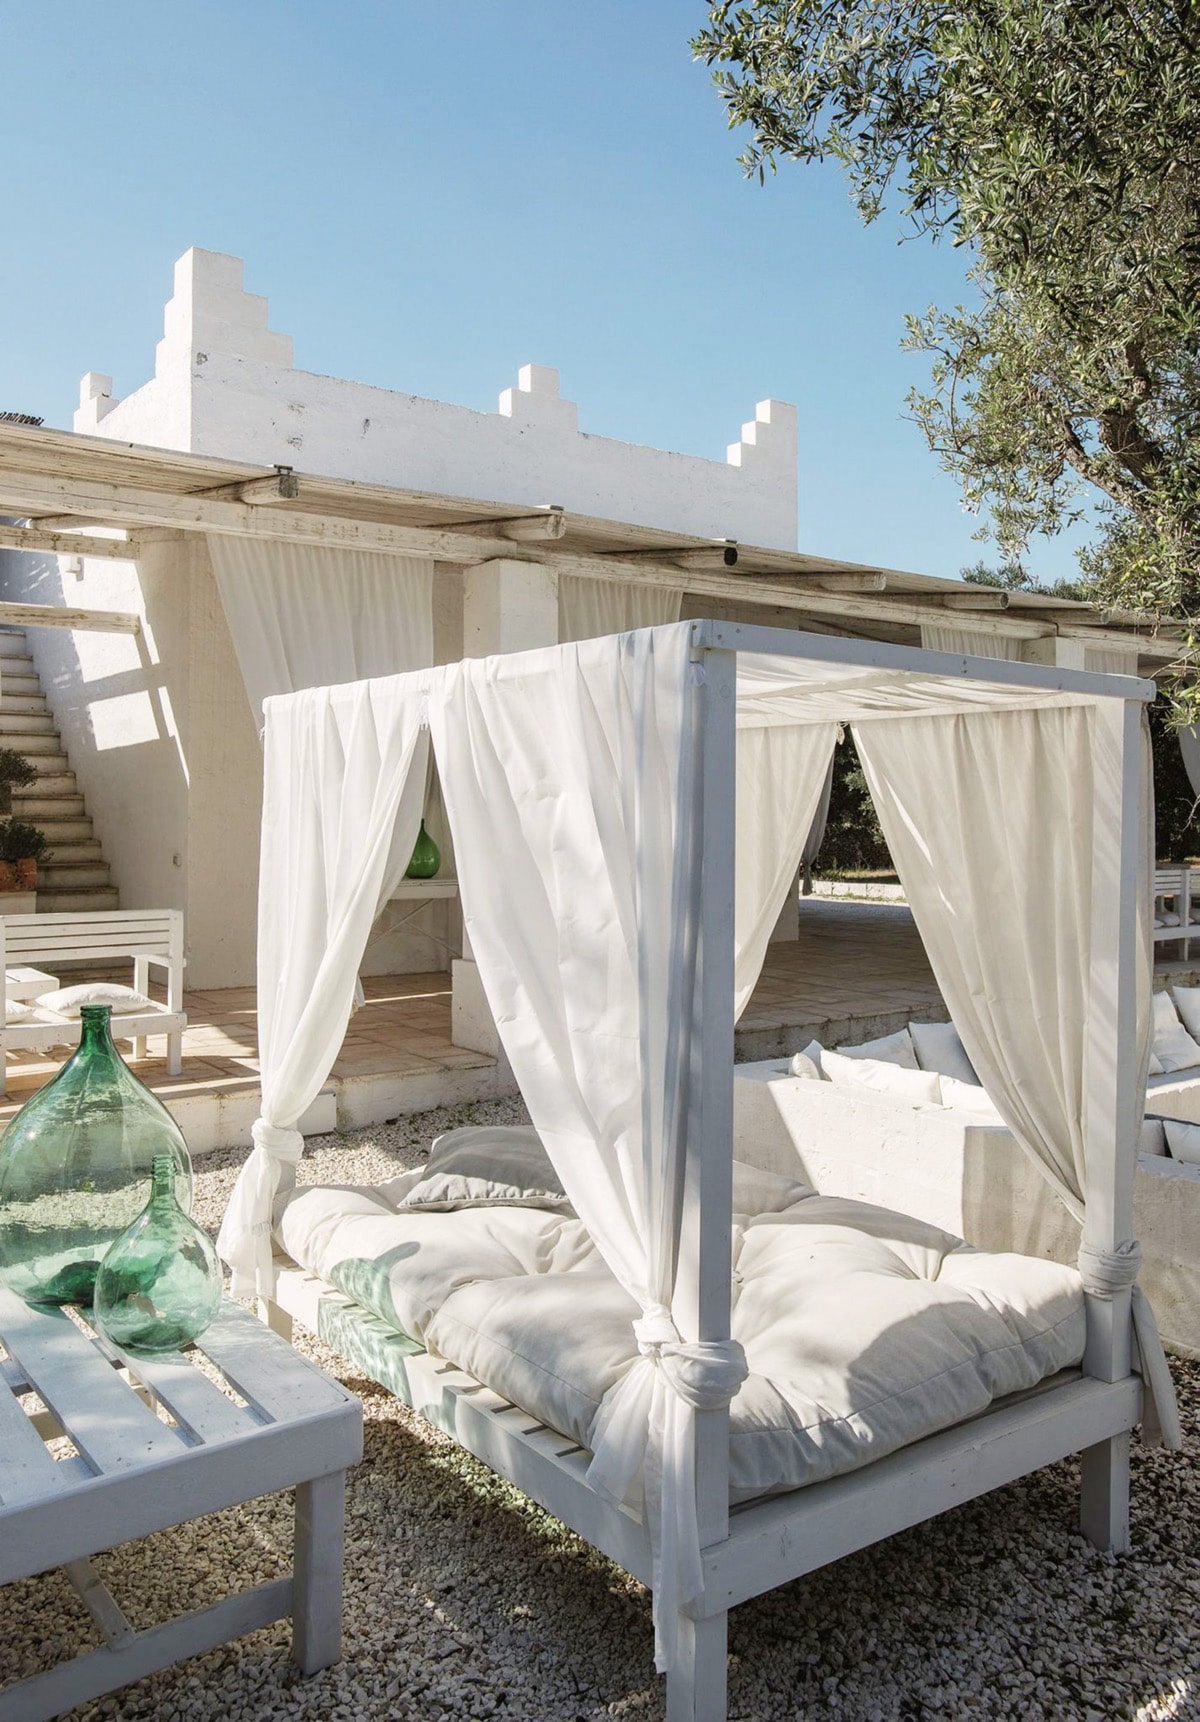 lounge in the italian sunshine in this vacation home you can rent in Puglia | coco kelley